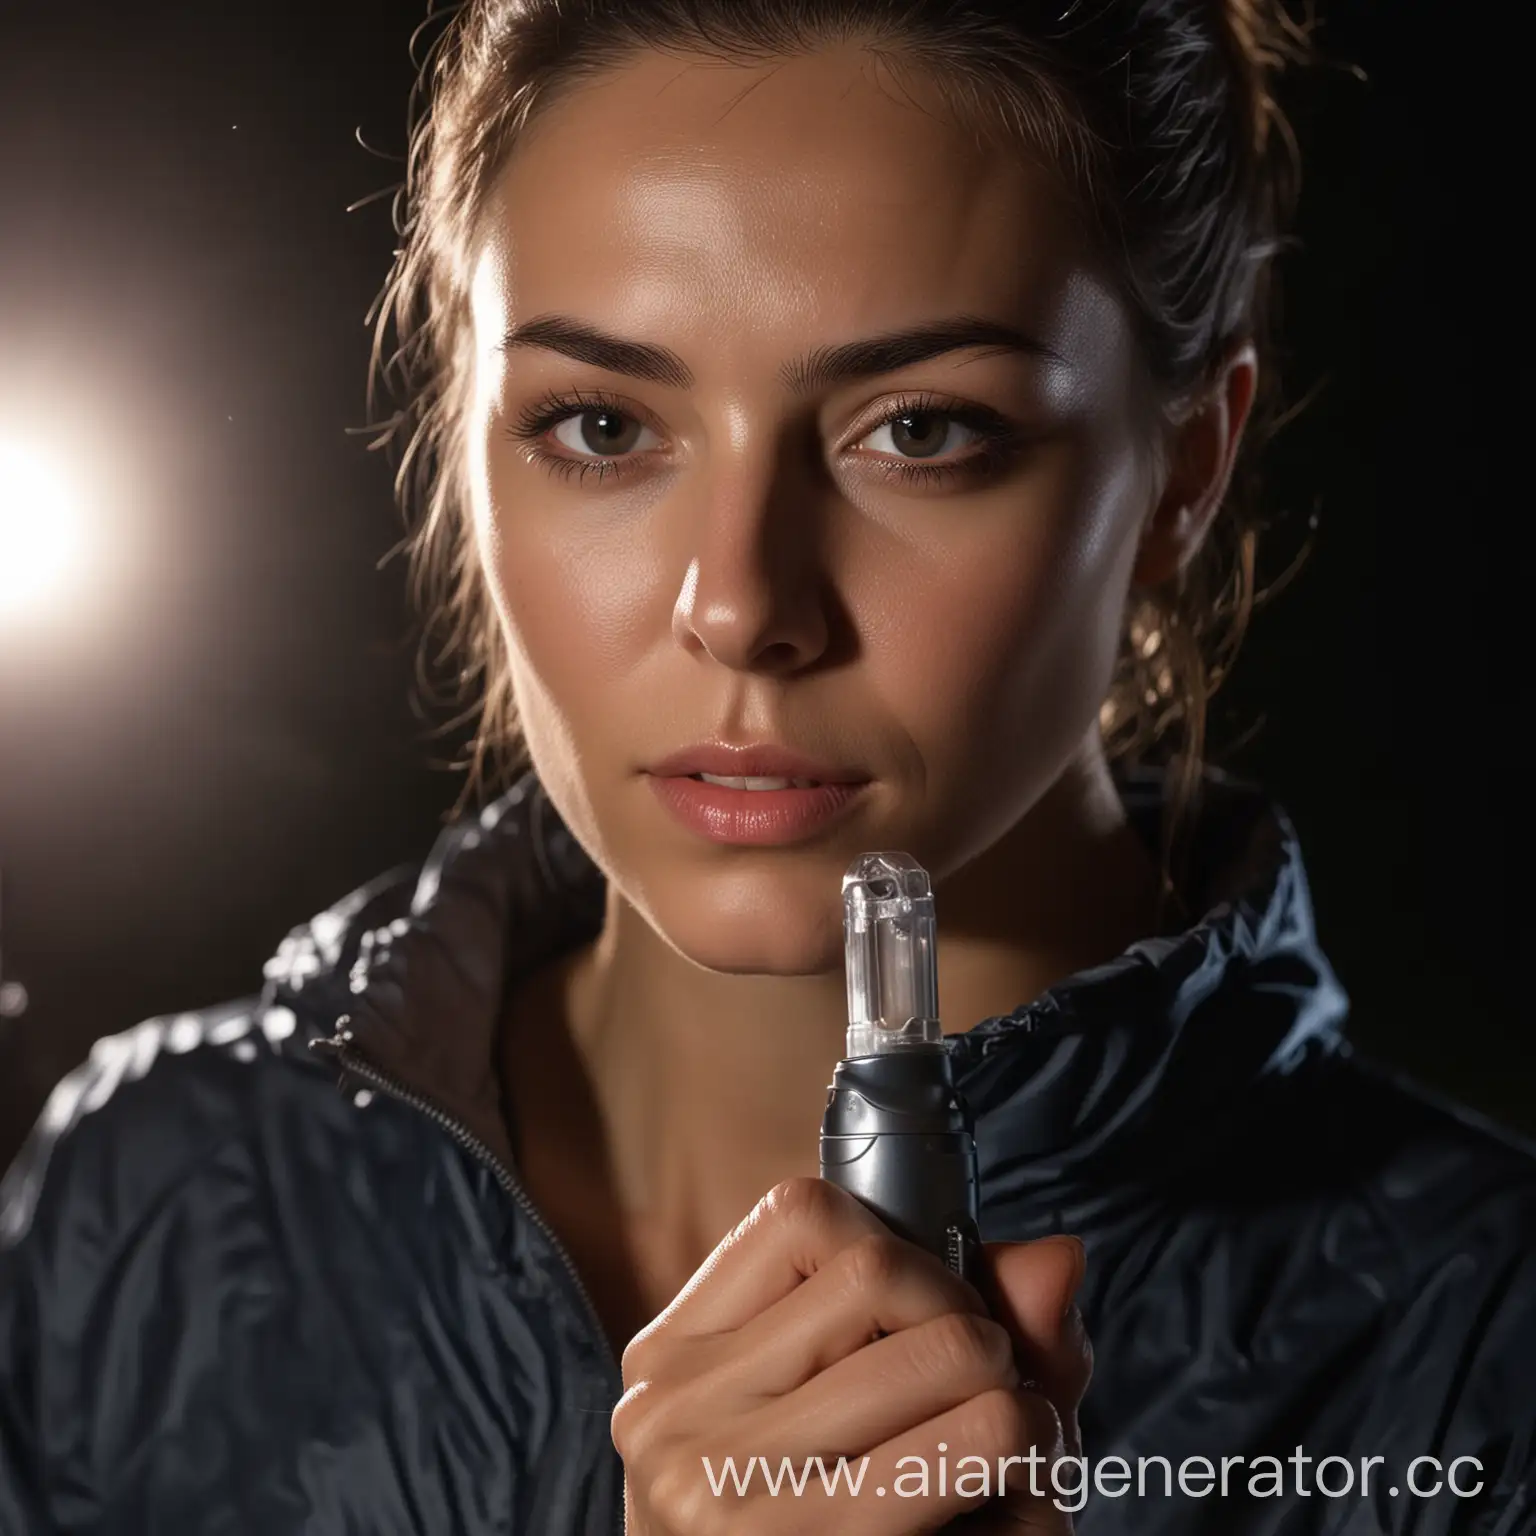 Woman-Examining-Outdoor-Clothing-Details-with-Flashlight-at-Night